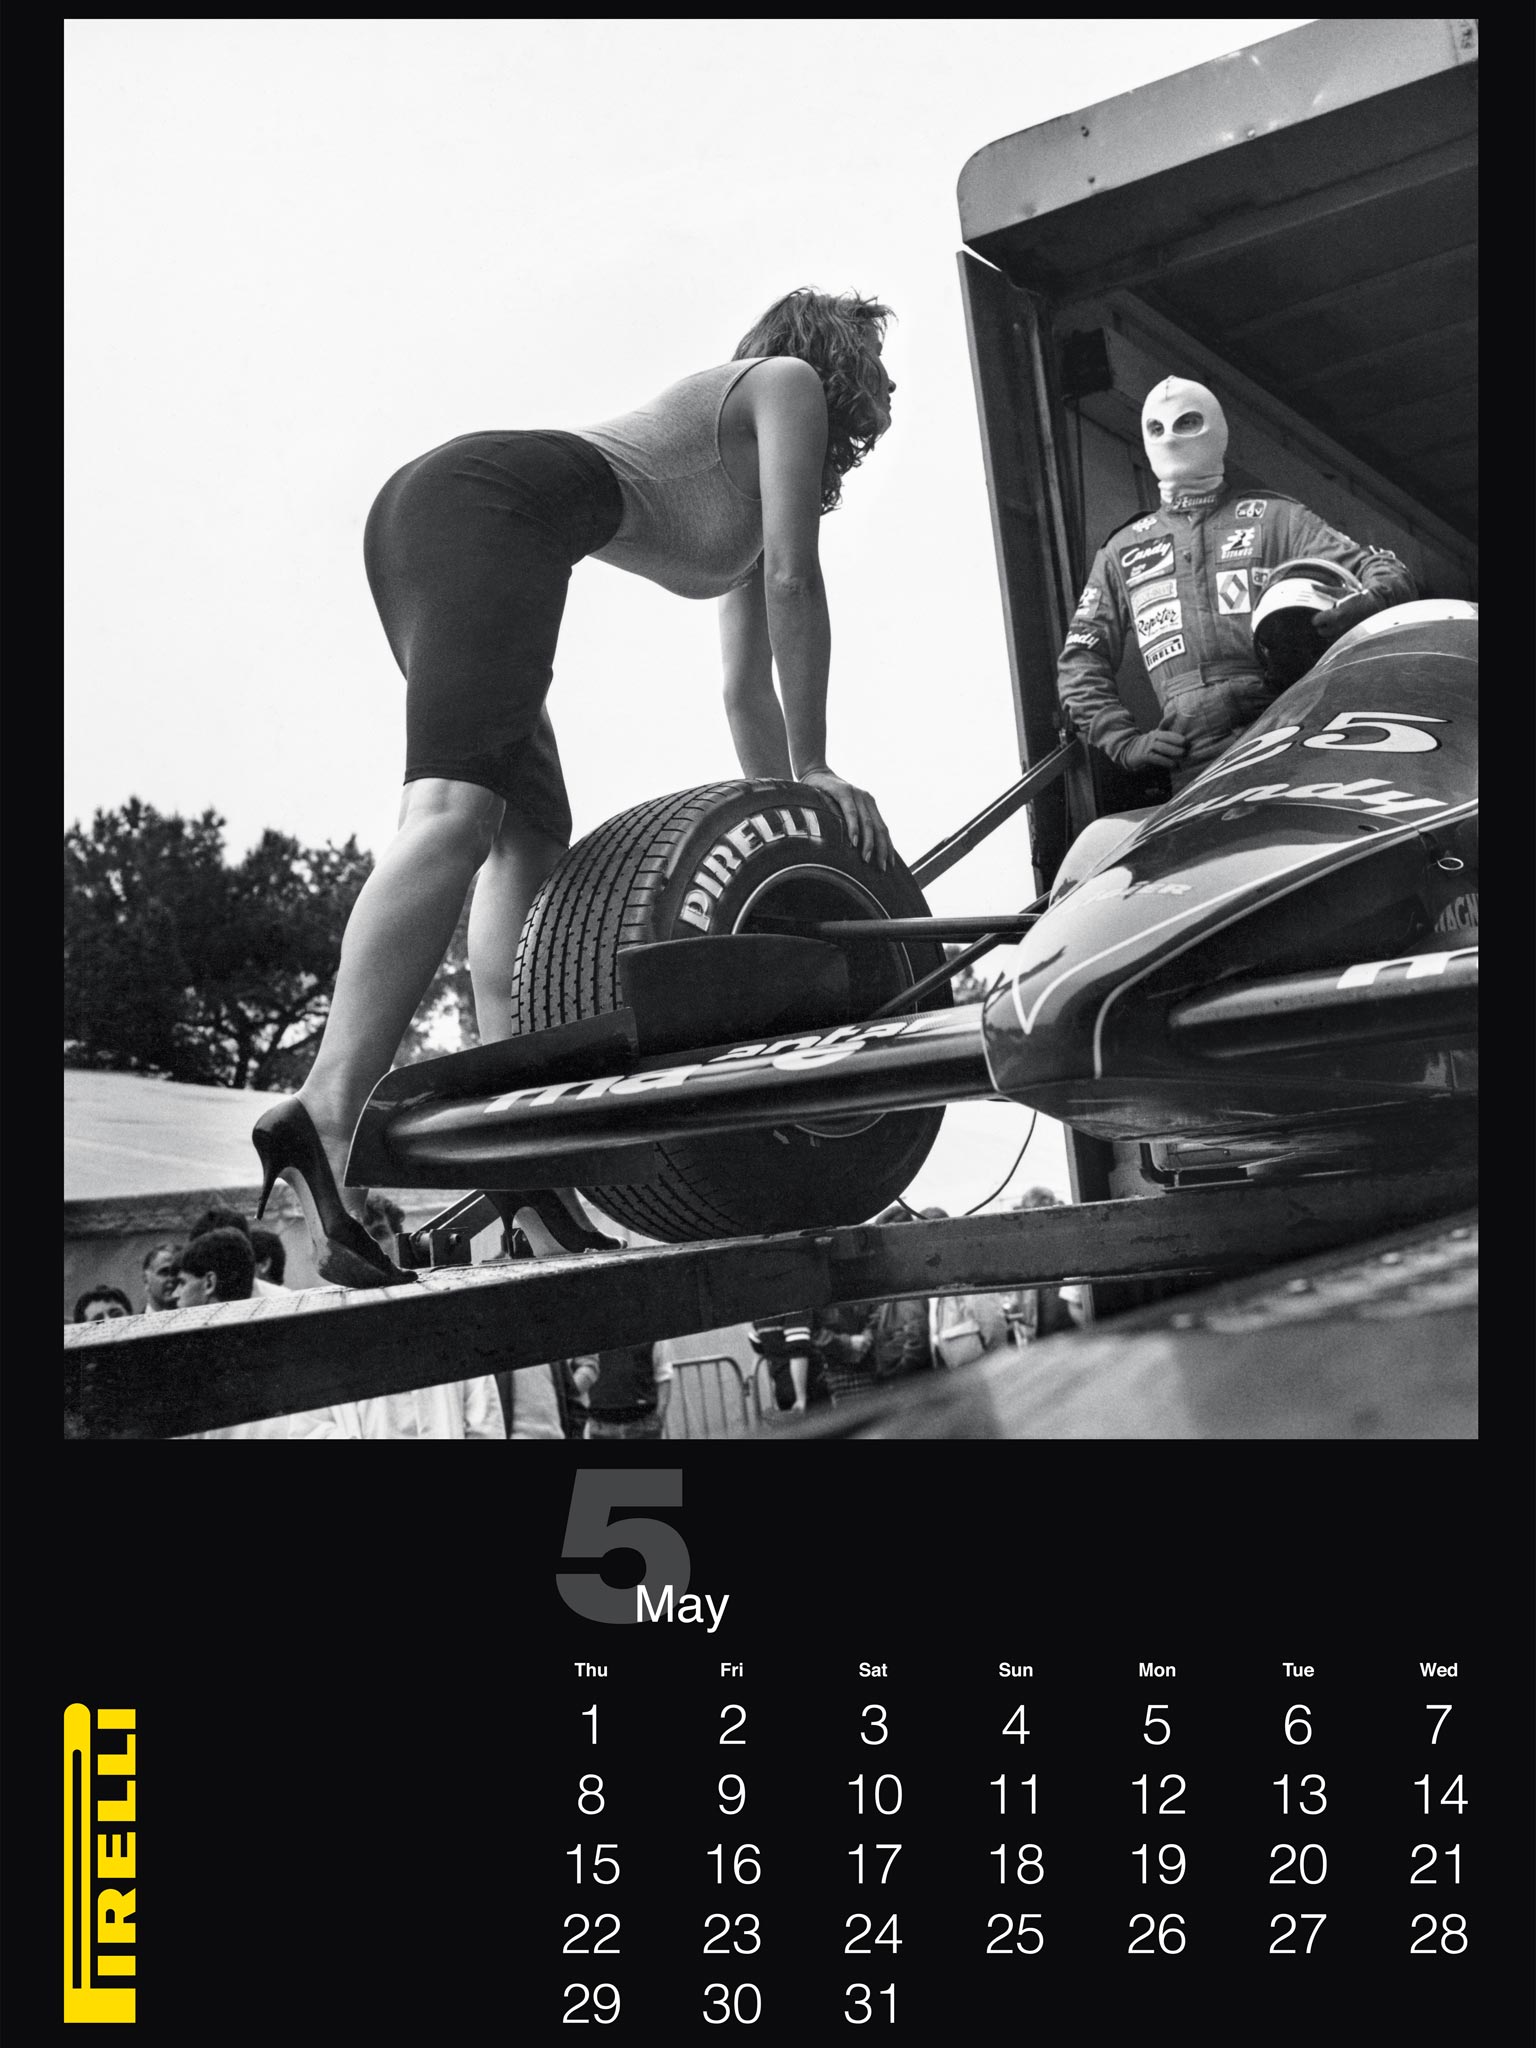 The Infamously Risqu Pirelli Calendar Reaches Has It Moved With